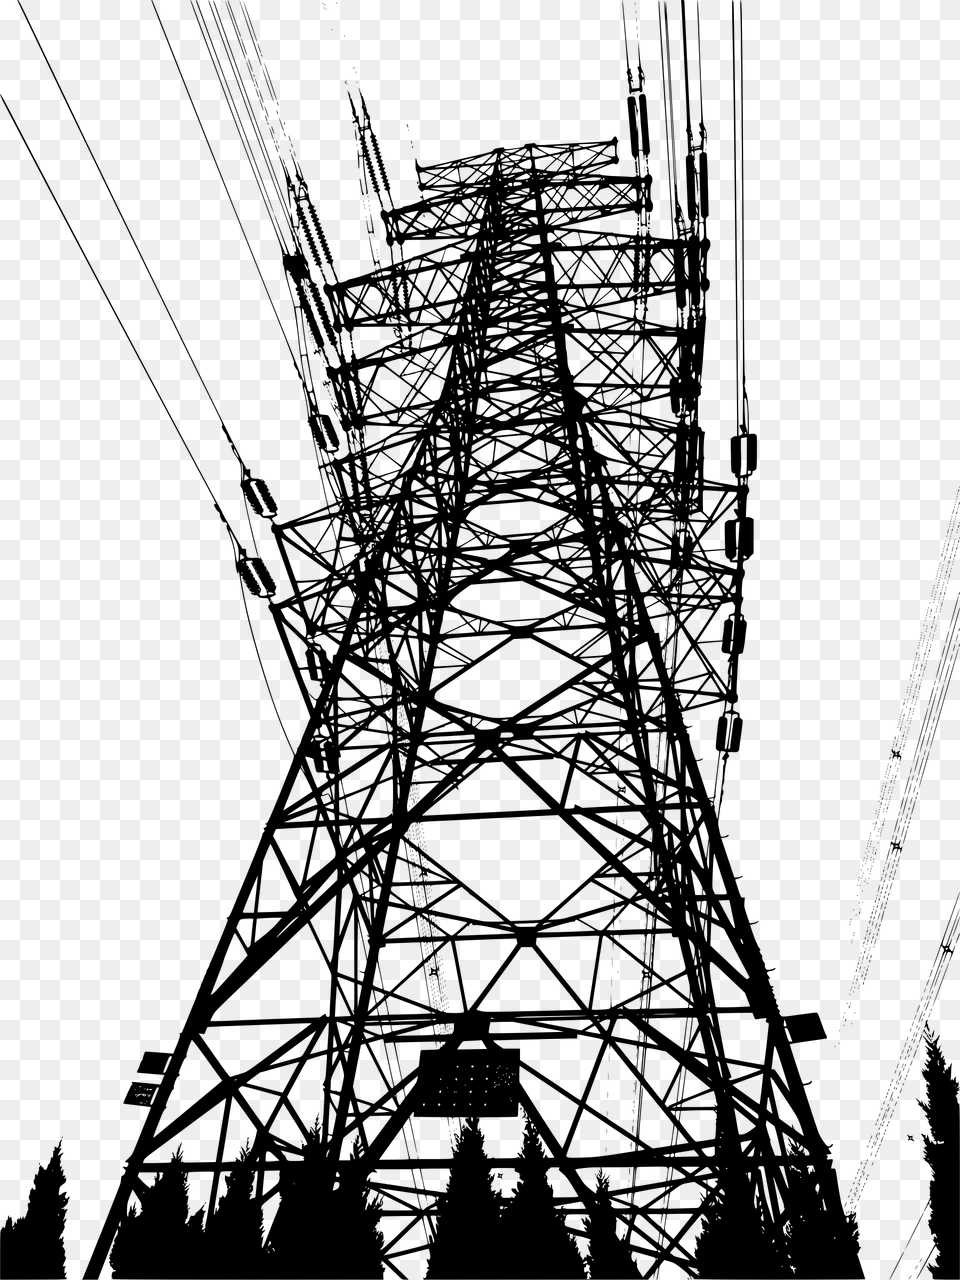 This Free Icons Design Of Powerlines In The Beijing, Gray Png Image